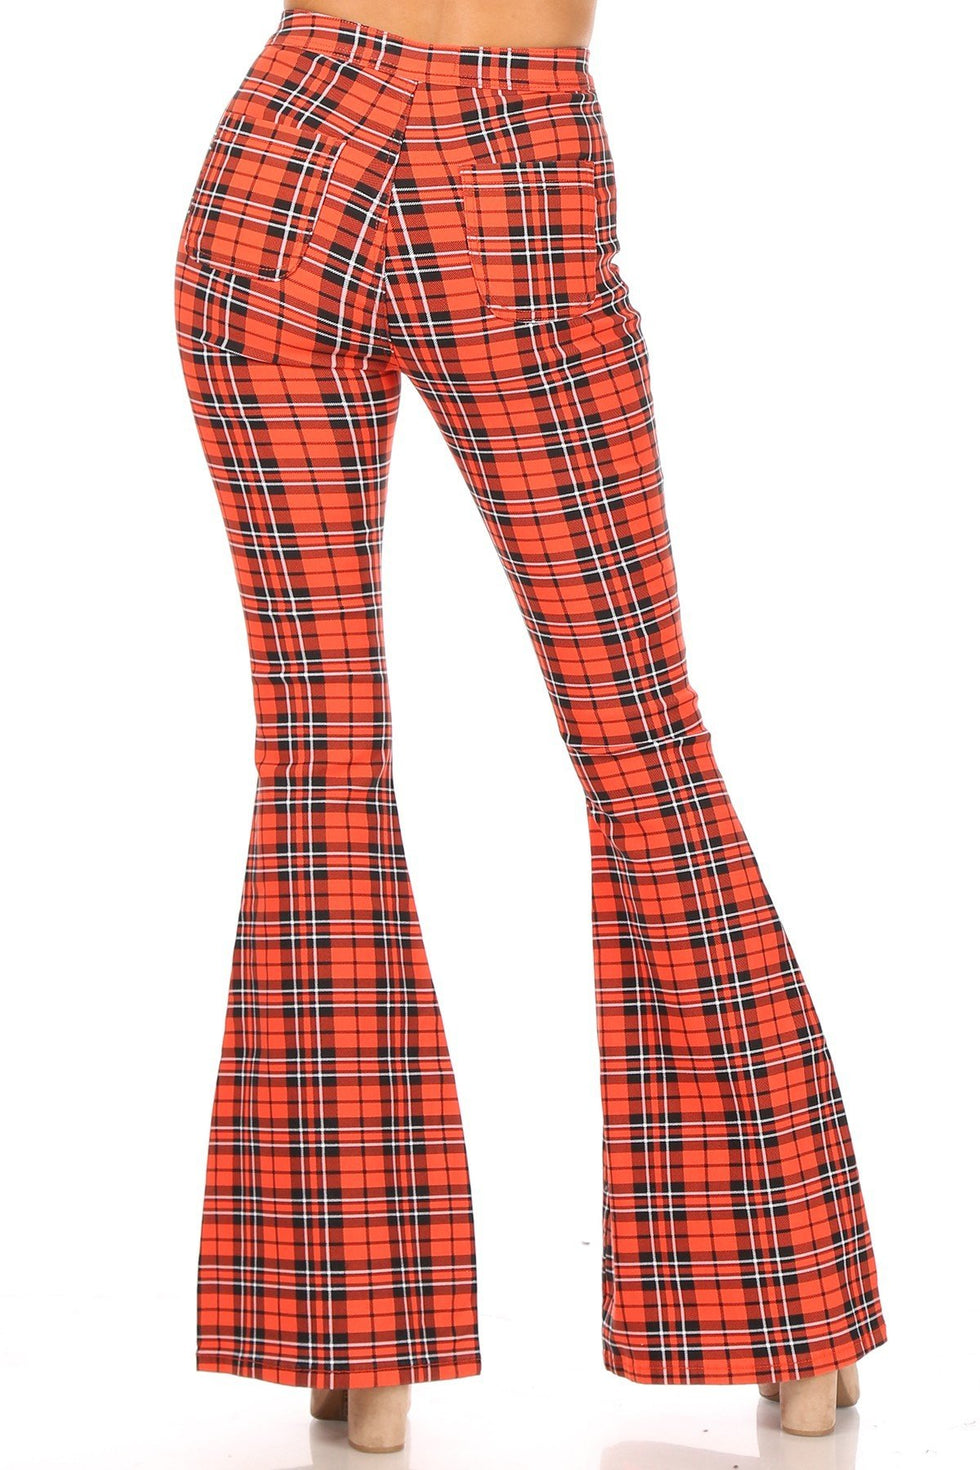 Super High Waisted Checkered Plaid Bell Bottom Jeans - Red – SohoGirl.com